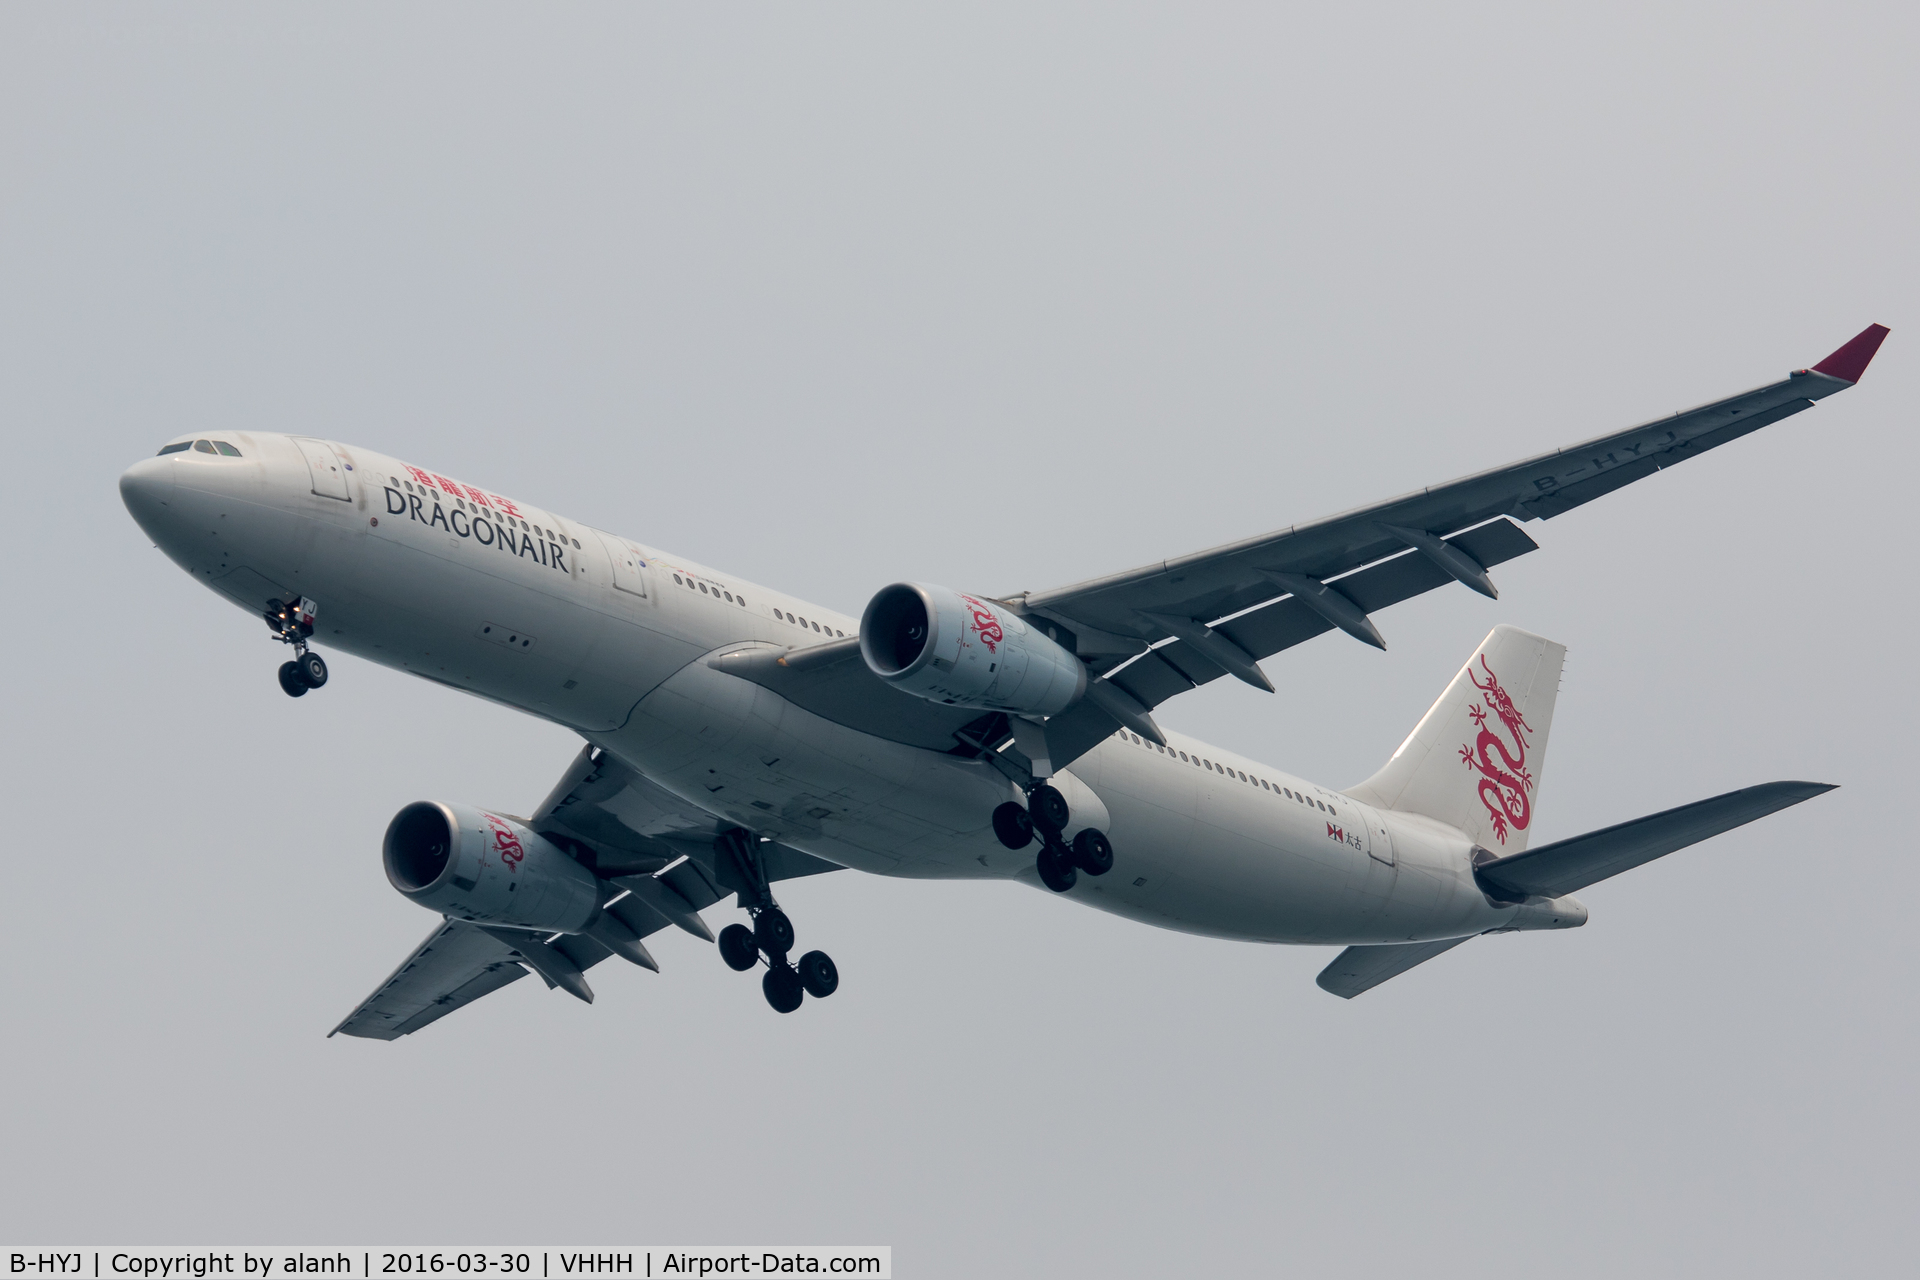 B-HYJ, 2002 Airbus A330-343X C/N 512, On finals for Hong Kong, inbound from Beijing Capital Int'l